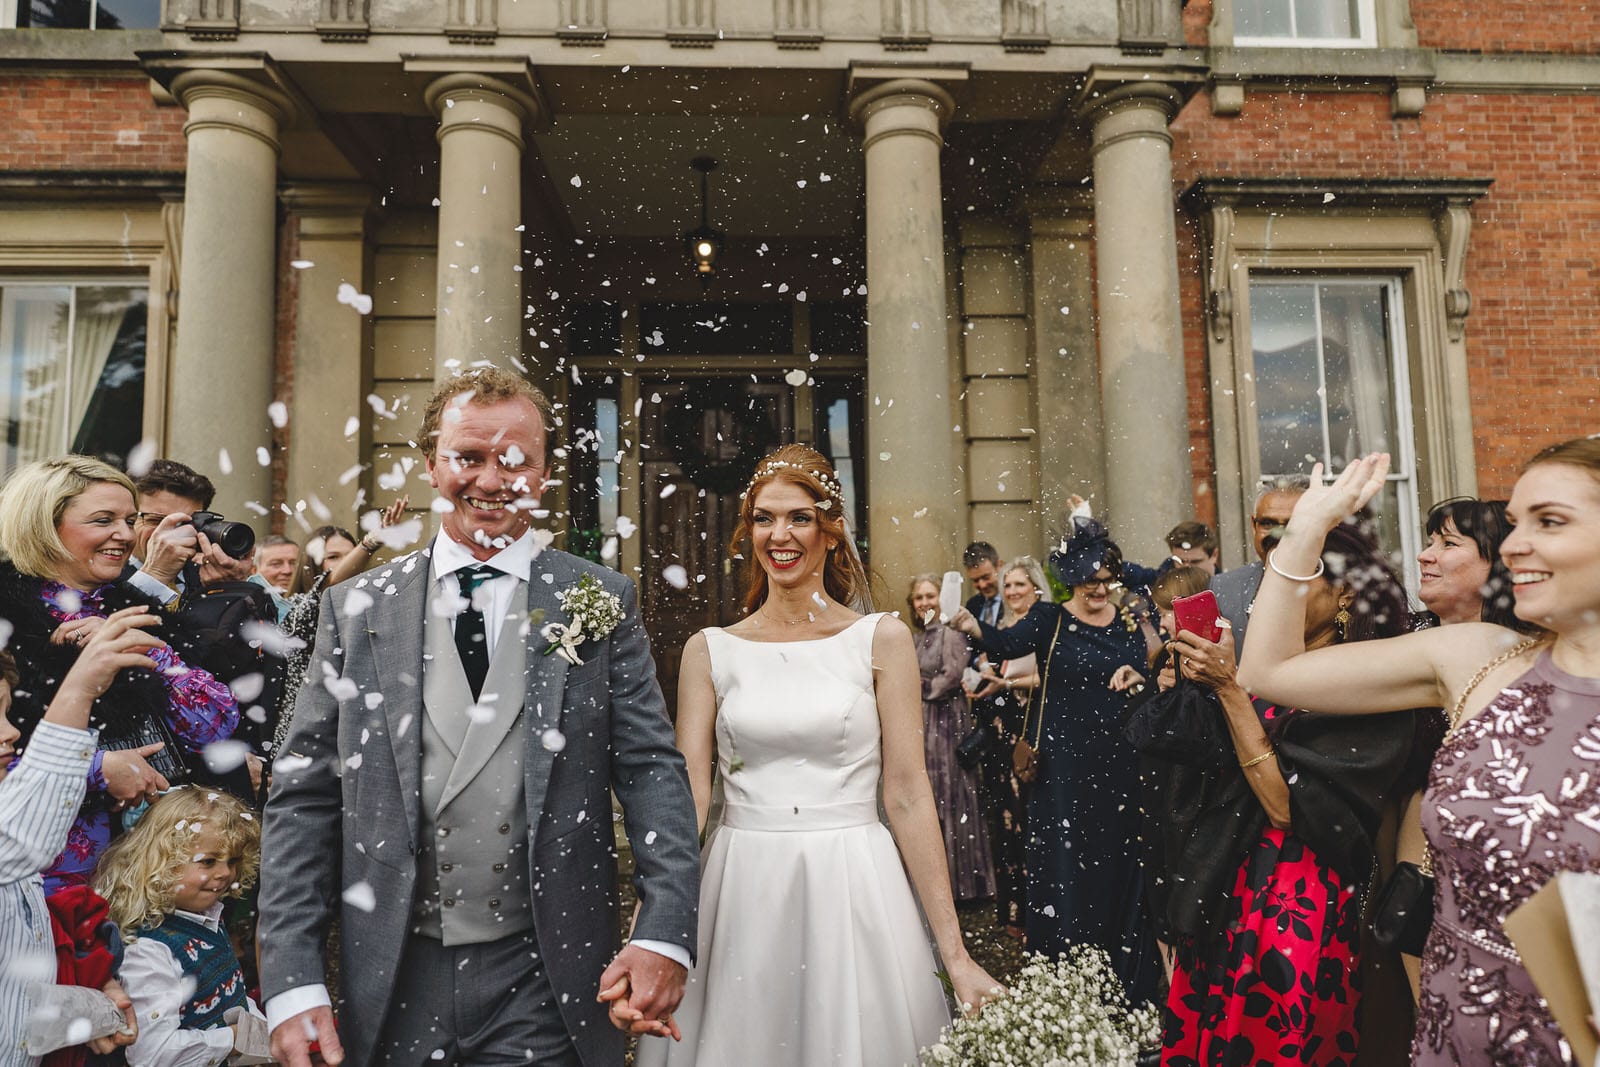 a bride and groom are surrounded by confetti at their wedding.